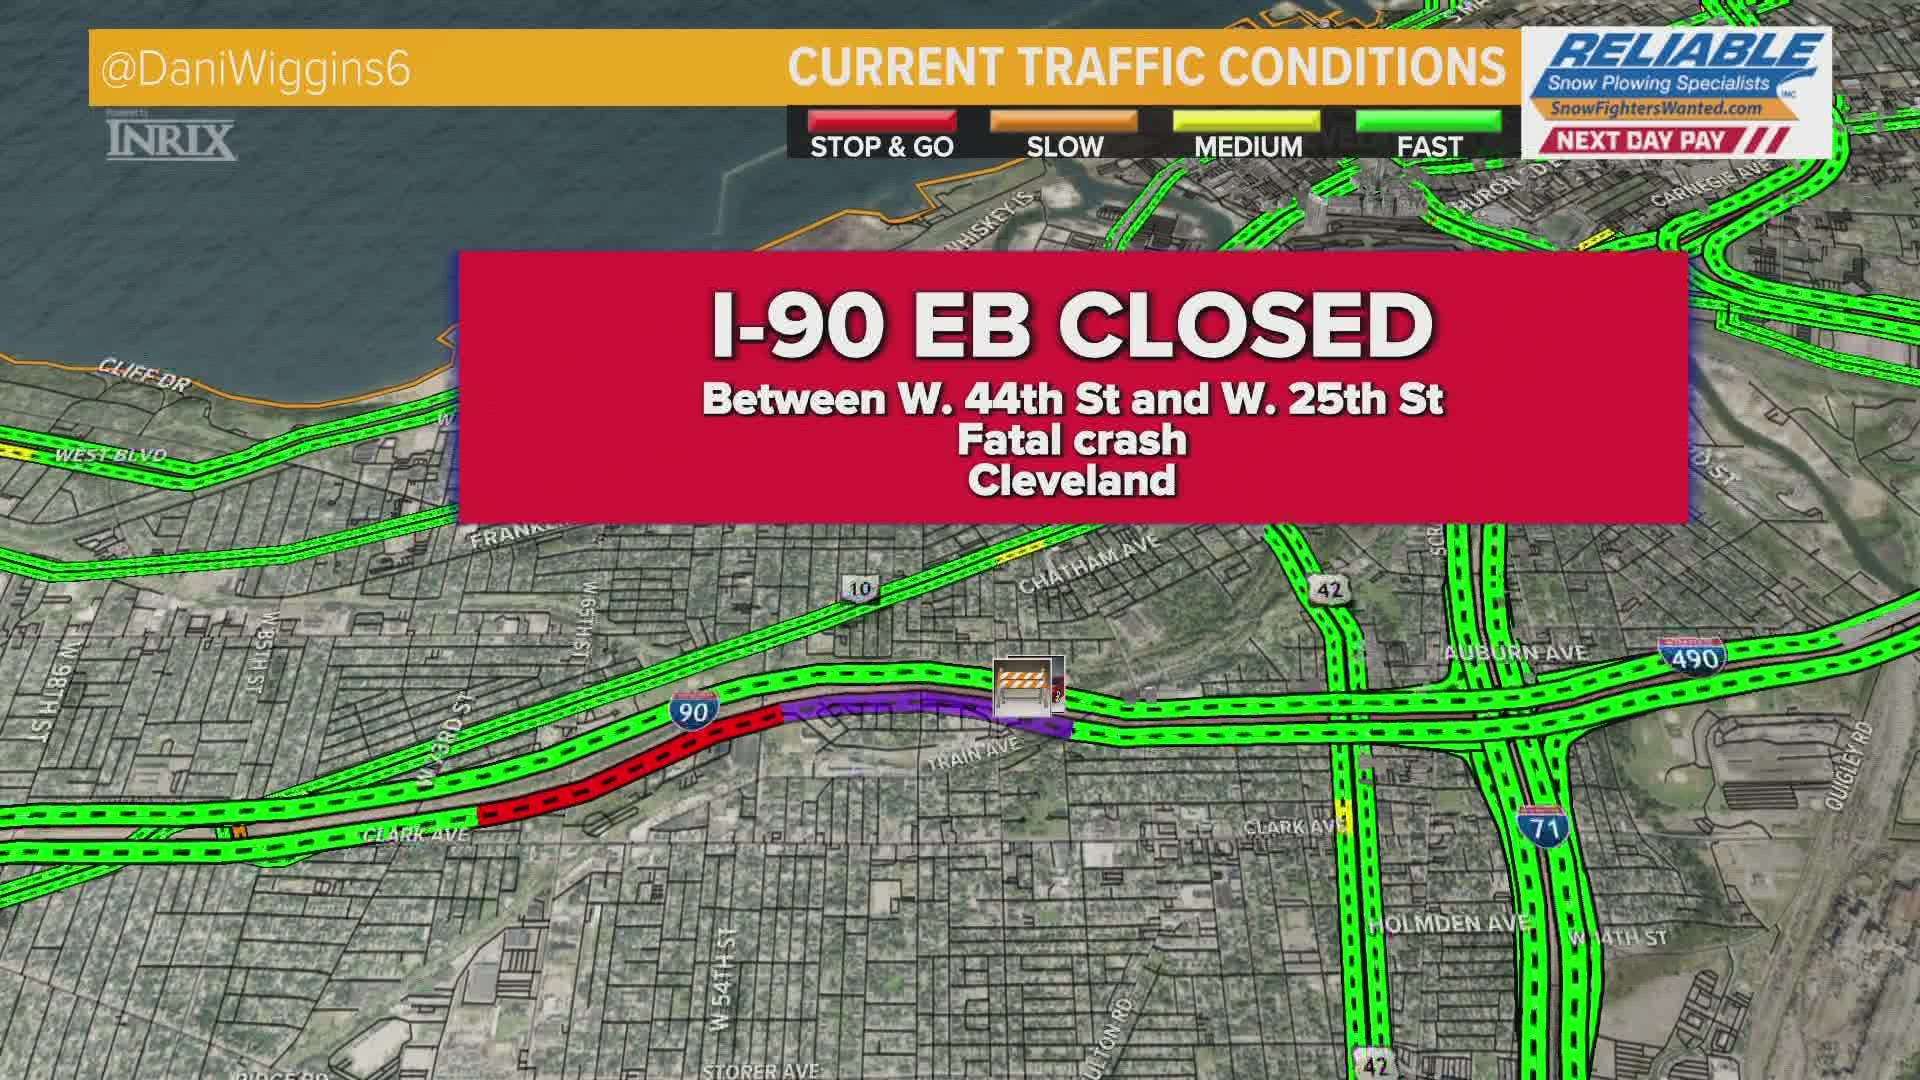 A 30-year-old man has died following a crash on I-90 East in Cleveland.